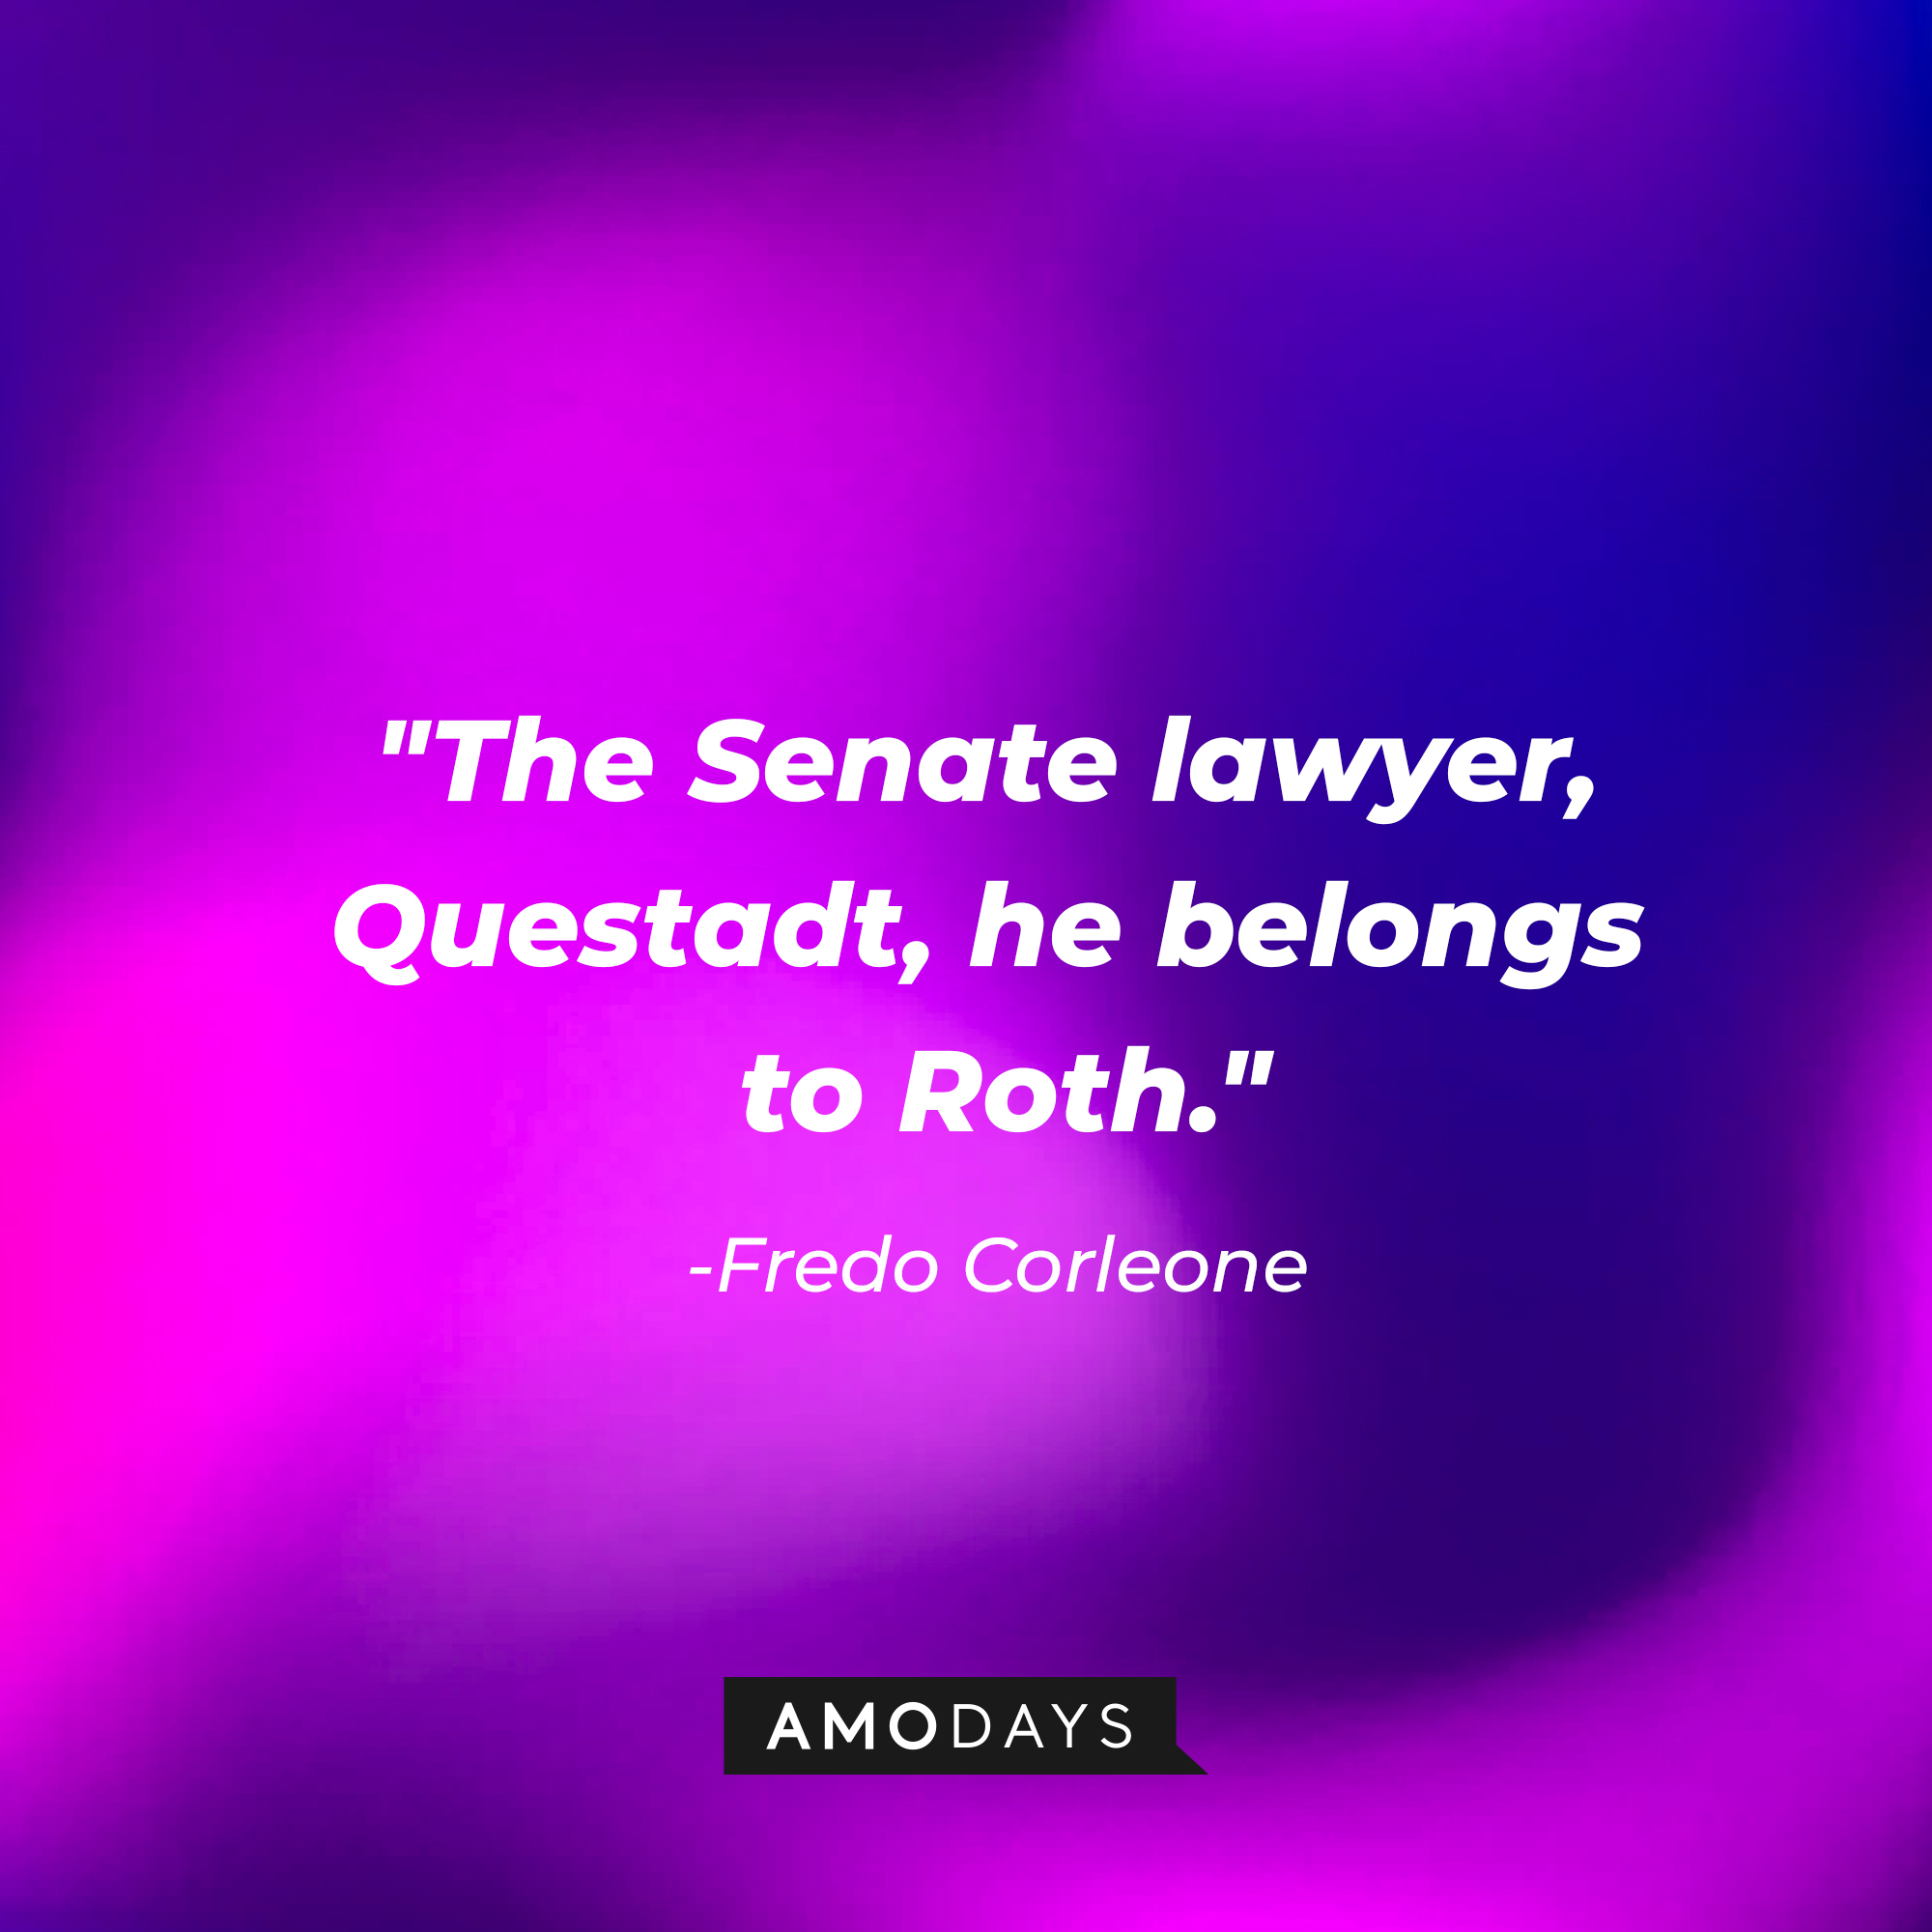 Fredo Corleone’s quote: "The Senate lawyer, Questadt, he belongs to Roth." | Source: AmoDays